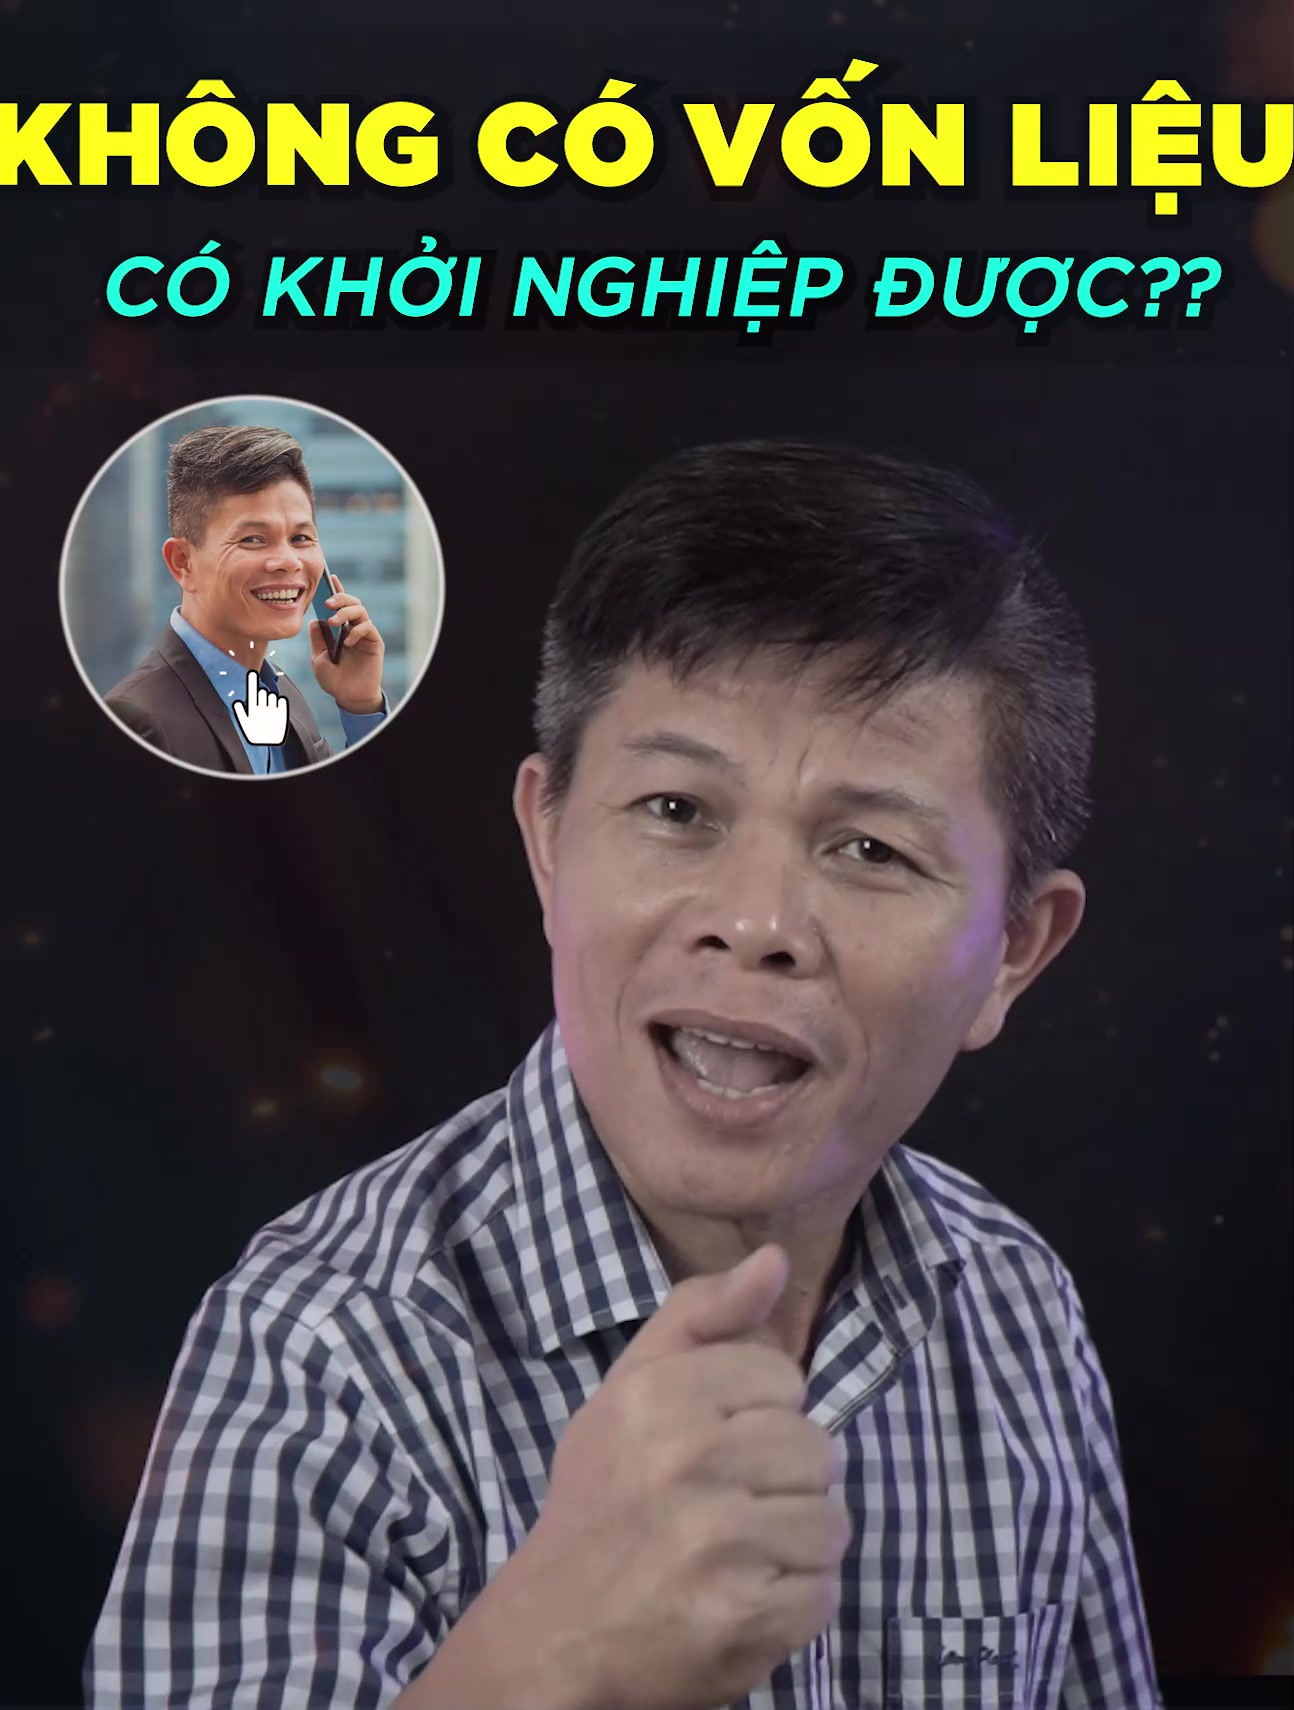 @Thầy Duy Khởi Nghiệp